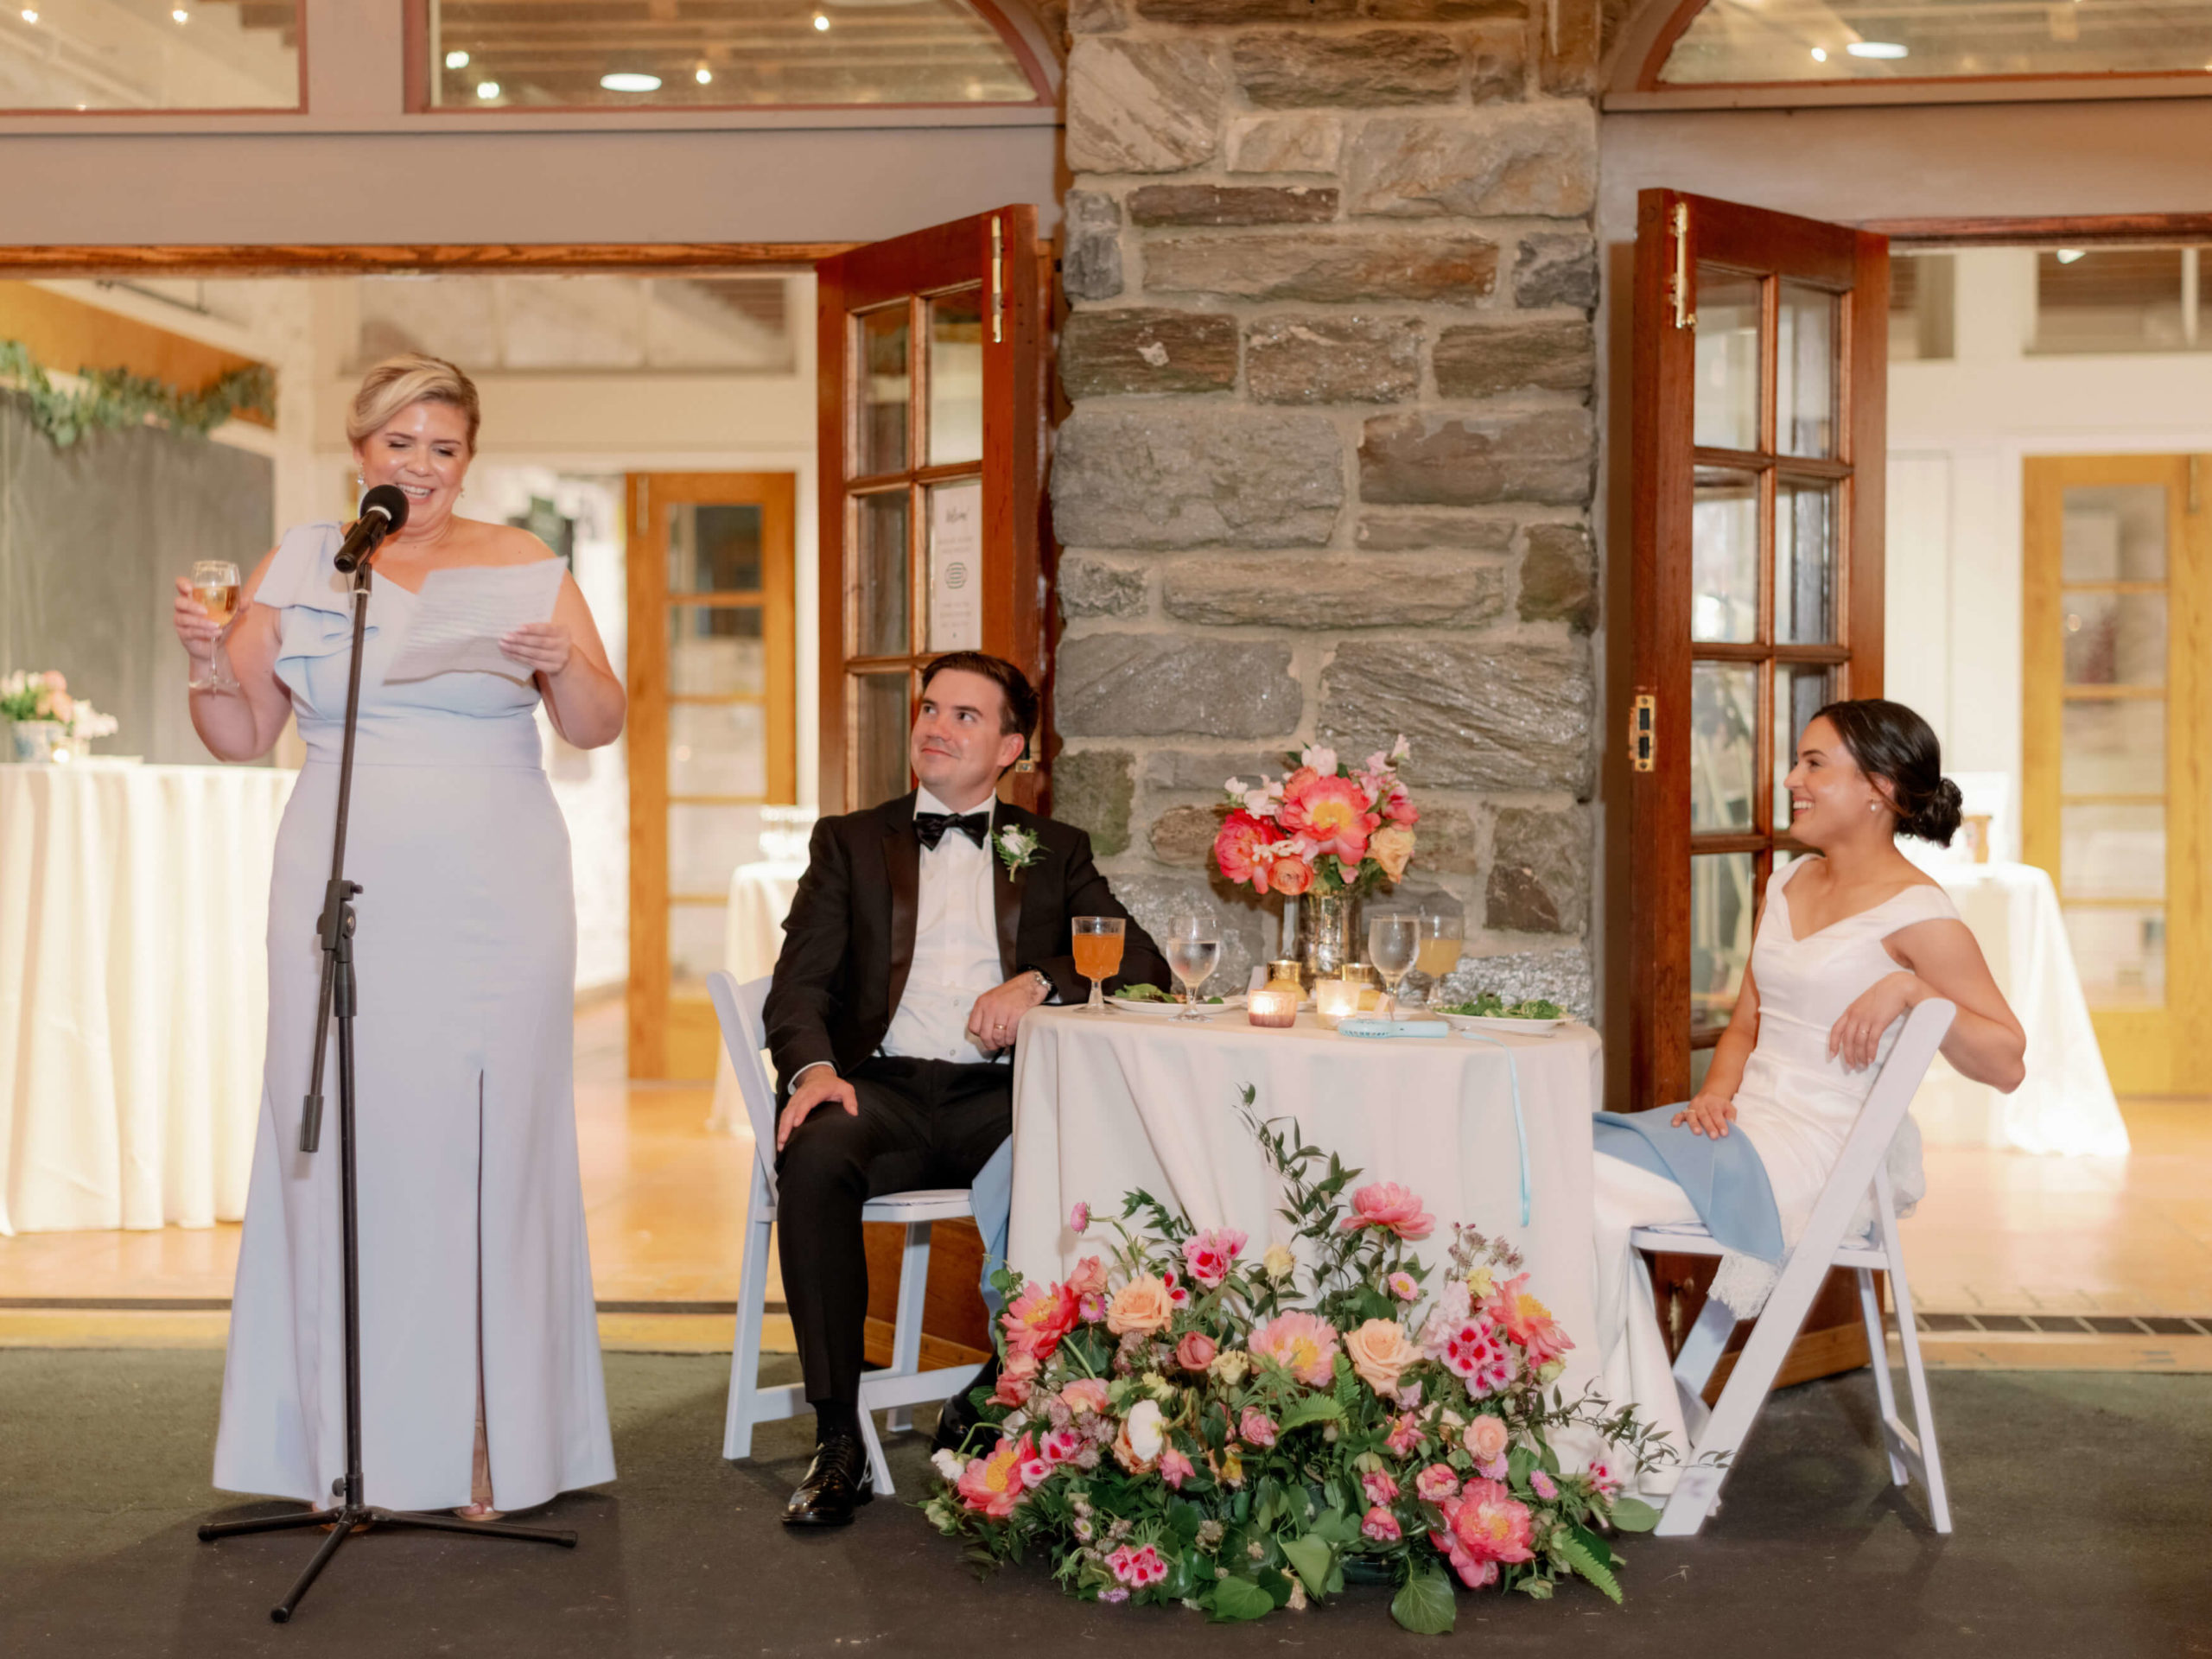 The bride and groom are happily watching a guest as she reads her speech. Image by Jenny Fu Studio